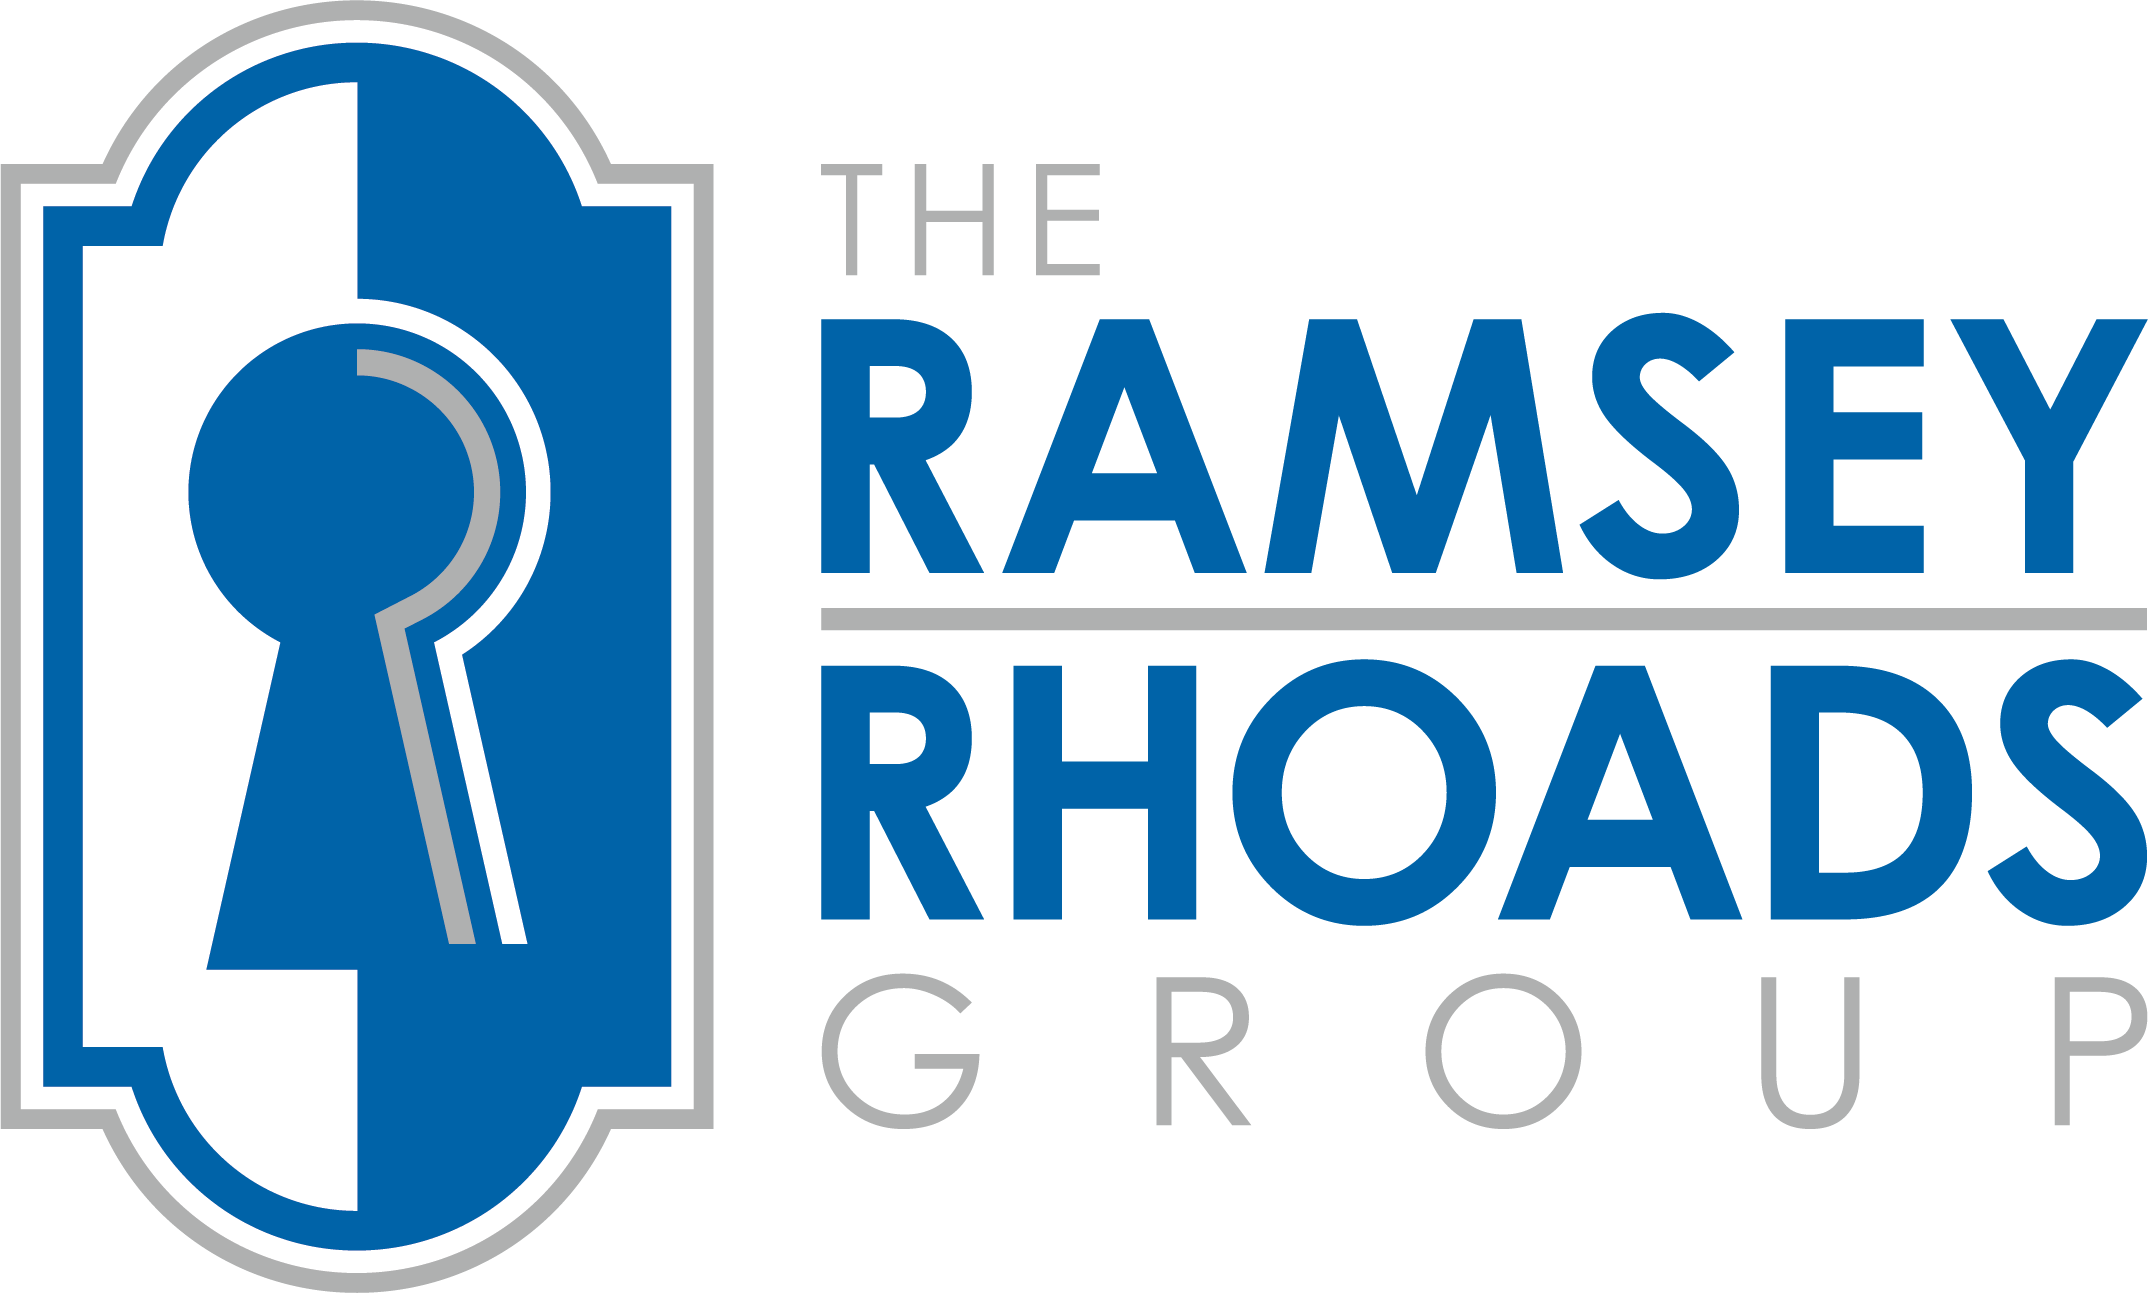 The Ramsey Rhoads Group with BHHS Homesale Realty